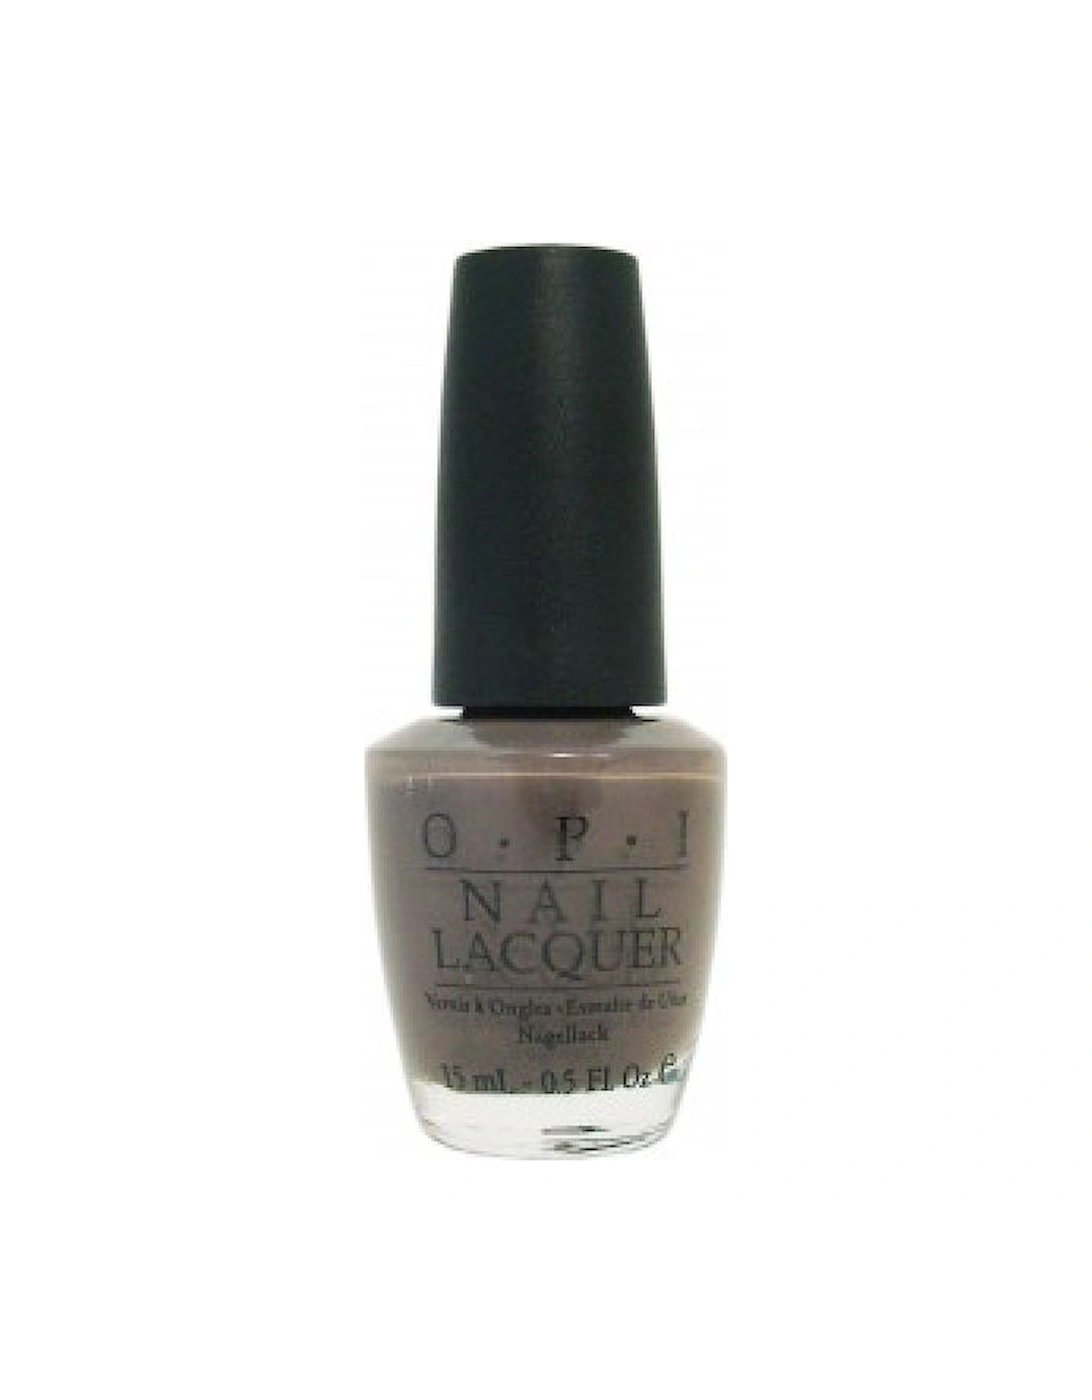 Nail Varnish - You Don't Know Jacques! (15ml) - OPI, 2 of 1